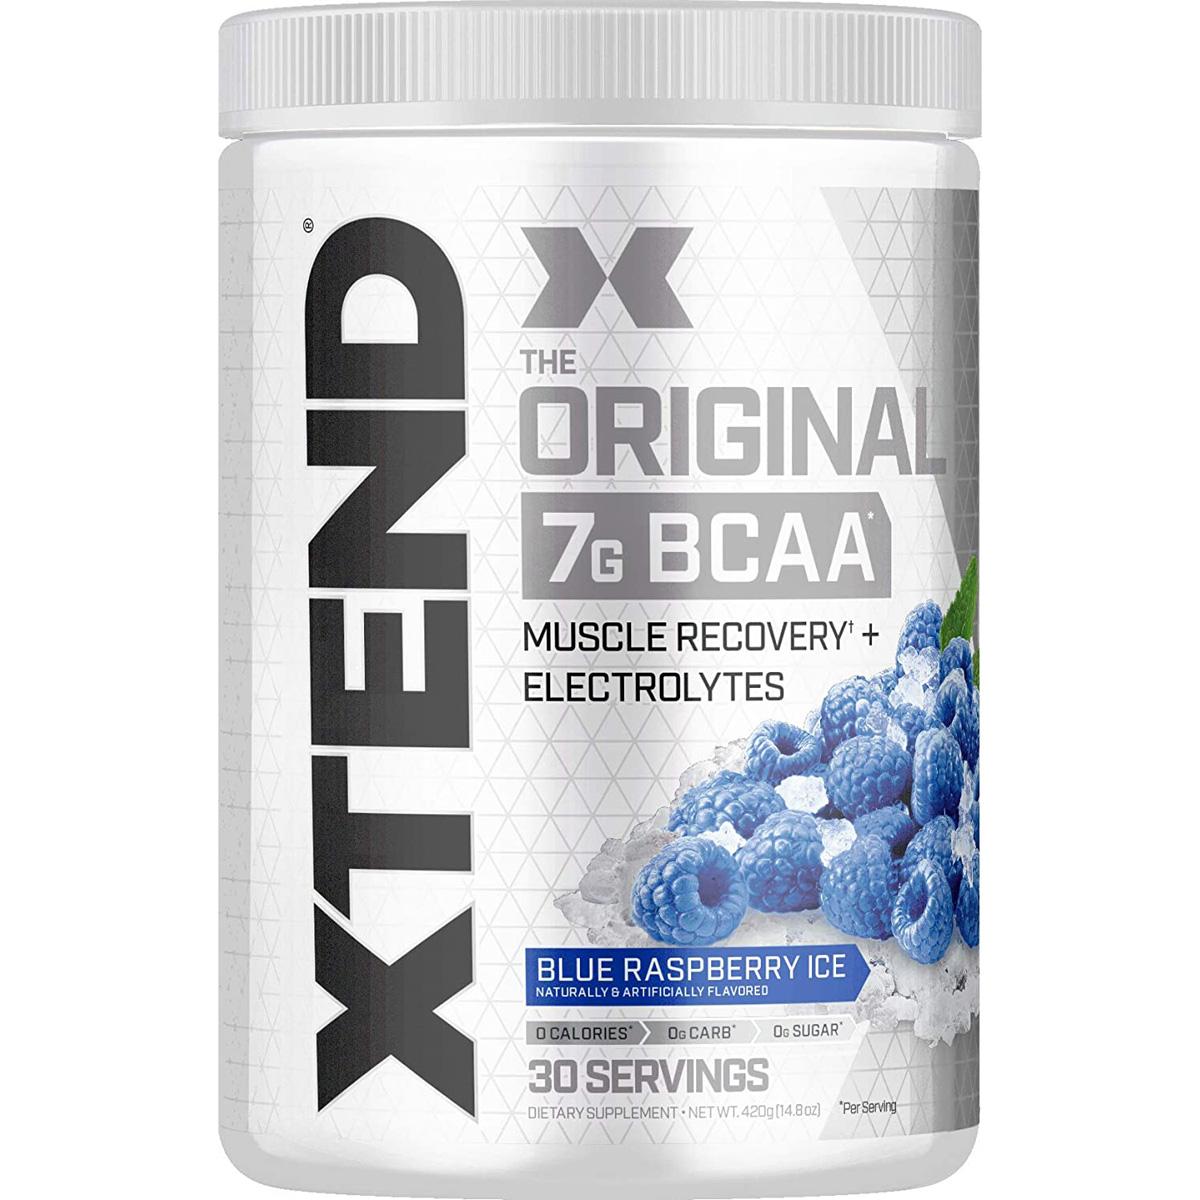 XTEND Original BCAA Workout Muscle Recovery Drink for $15.84 Shipped